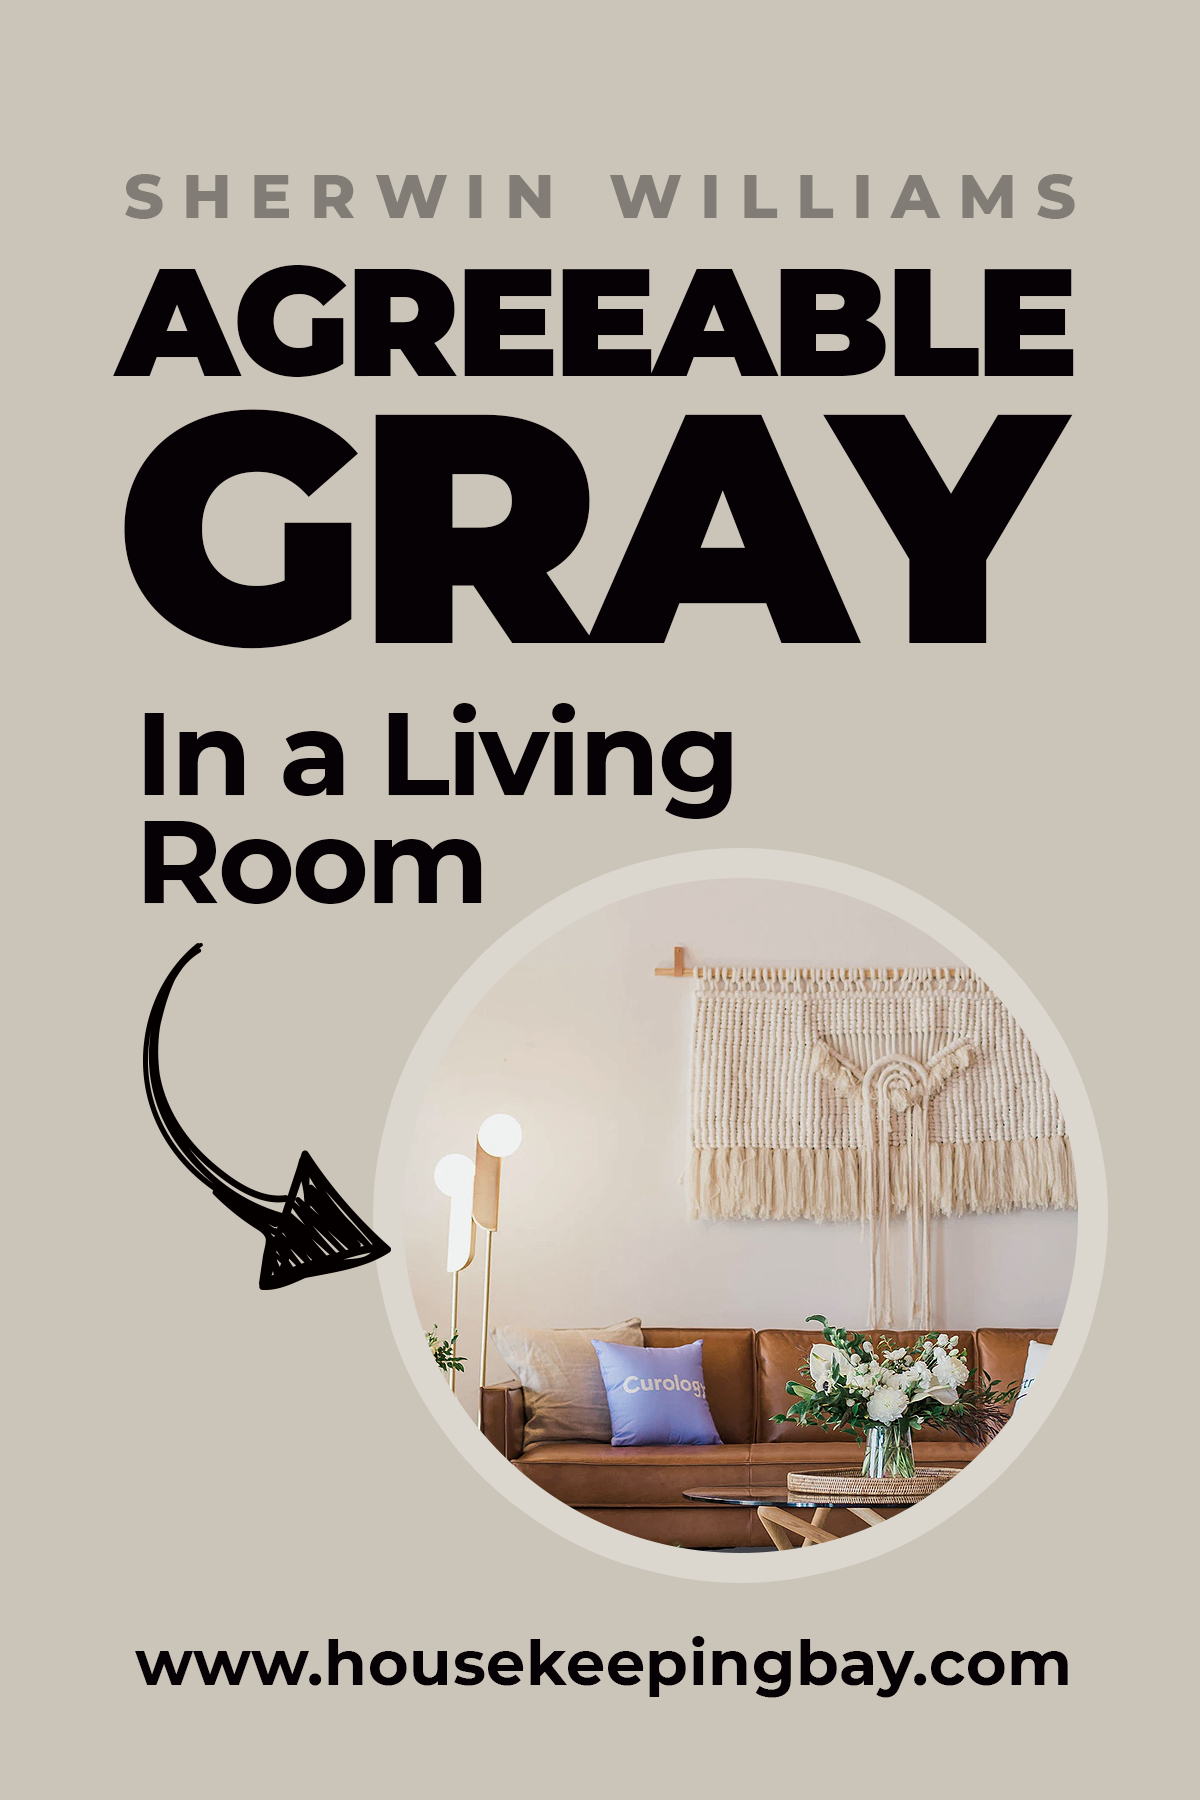 Agreeable Gray in a Living Room